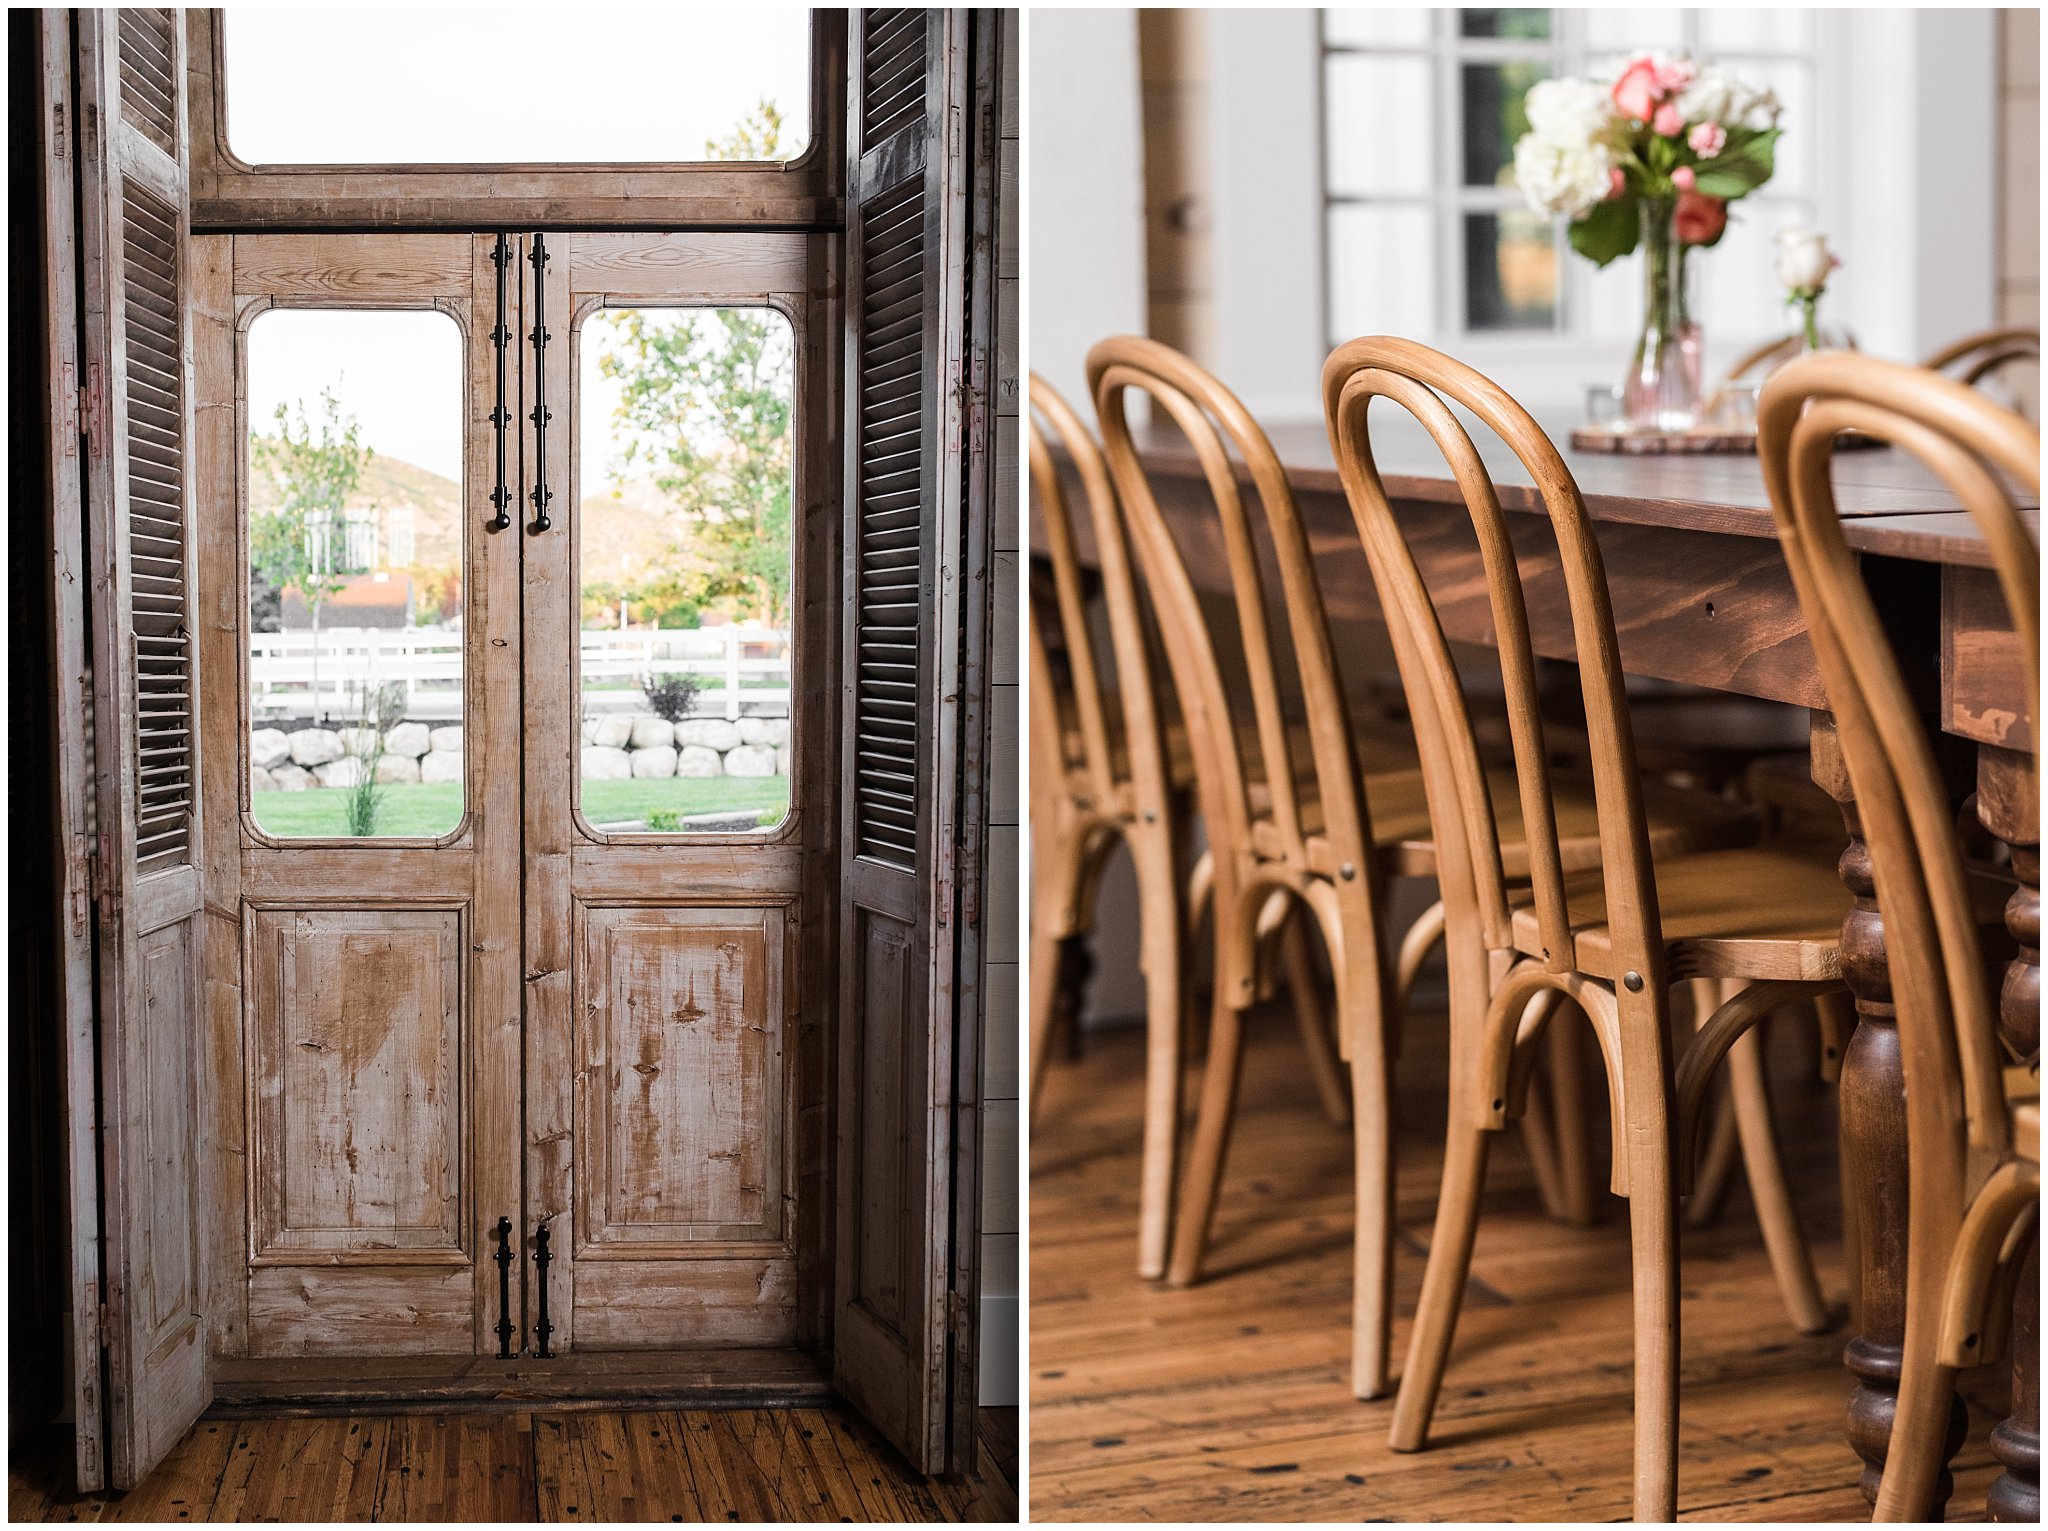 Table setting and vintage doors | Behind the Scenes of Walker Farms | Utah Wedding Venue | Jessie and Dallin Photography